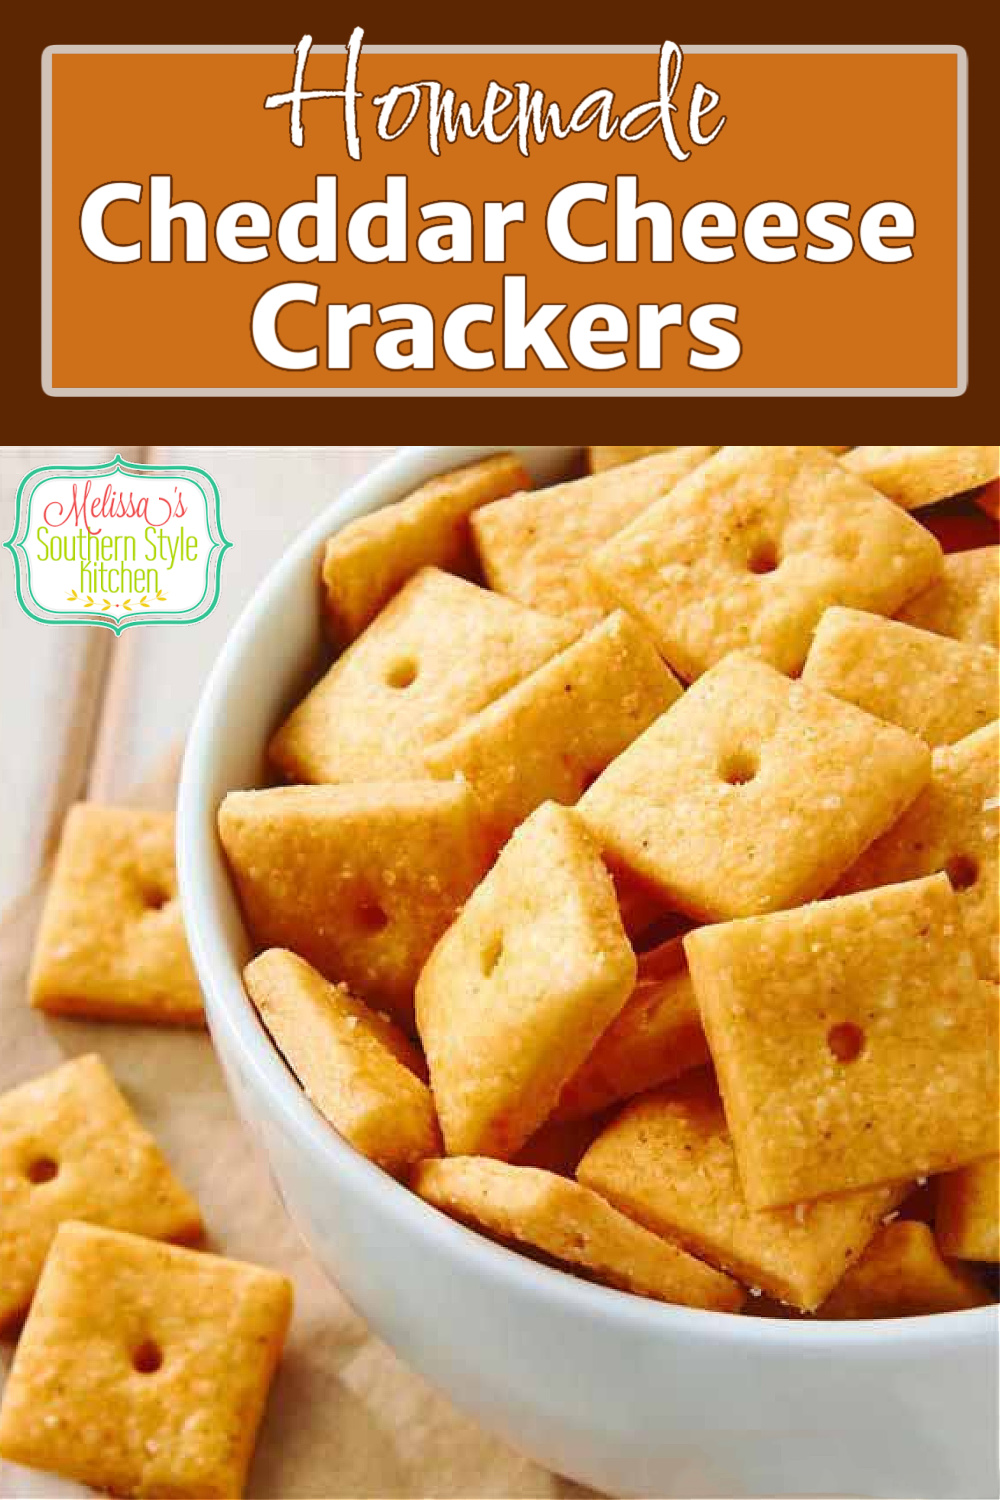 These Homemade Cheddar Cheese Crackers are cheesy, crisp and all natural ideal for serving at a casual get together and tailgating parties #cheesecrackers #homemadecheddarcheesecrackers #crackersrecipe #cheesecrackersrecipe #homemadecrackers